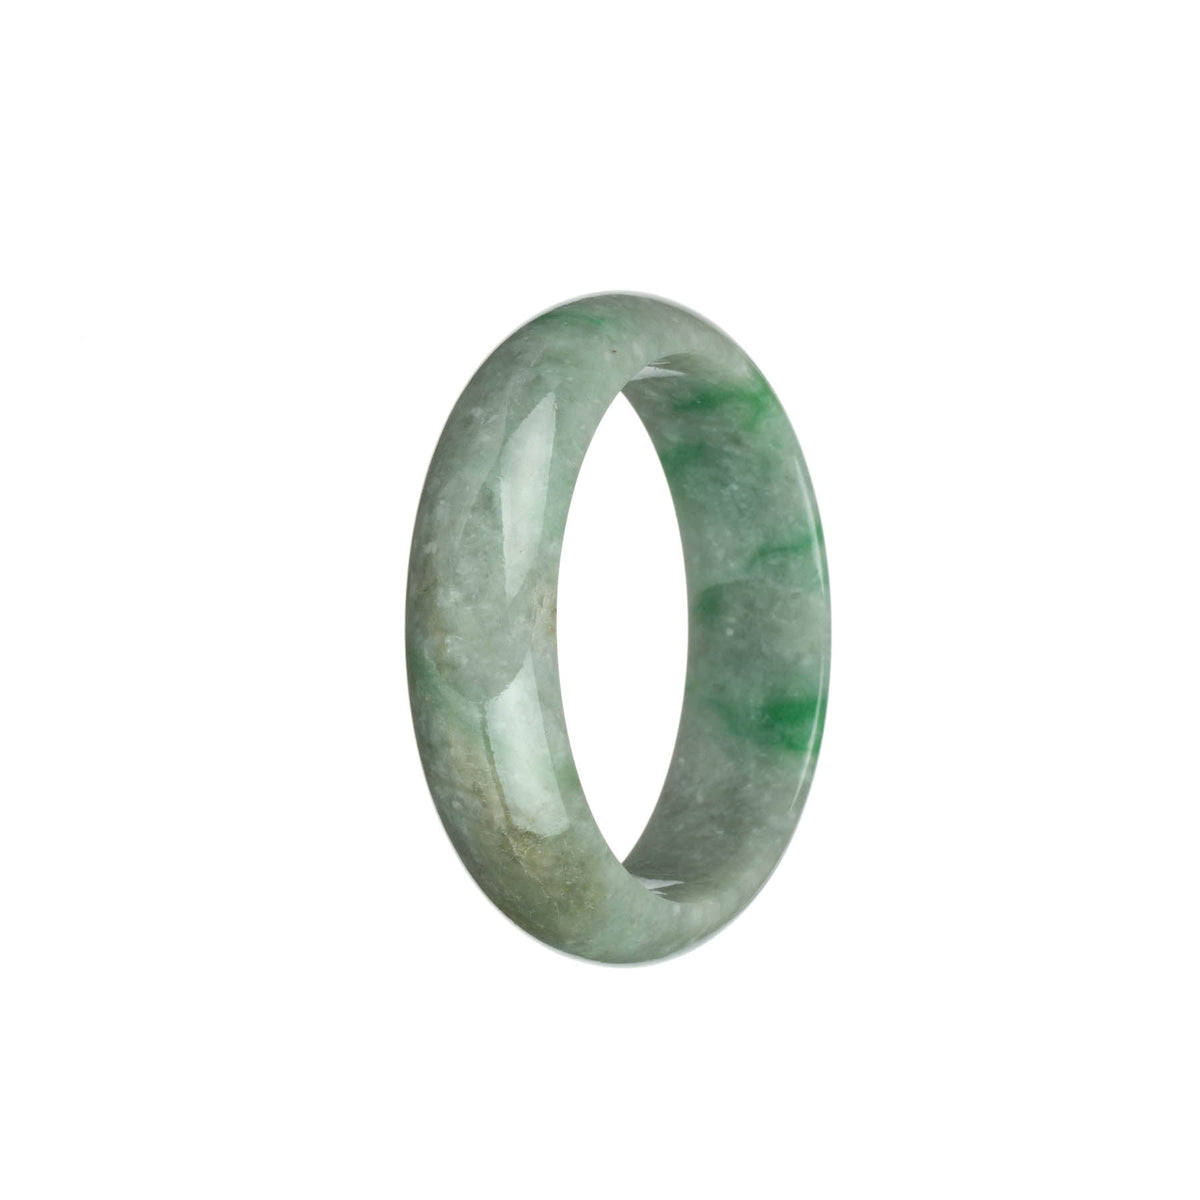 A stunning jade bracelet featuring a half moon shape, with a natural light grey color and beautiful emerald green patterns, complemented by light brown patches.